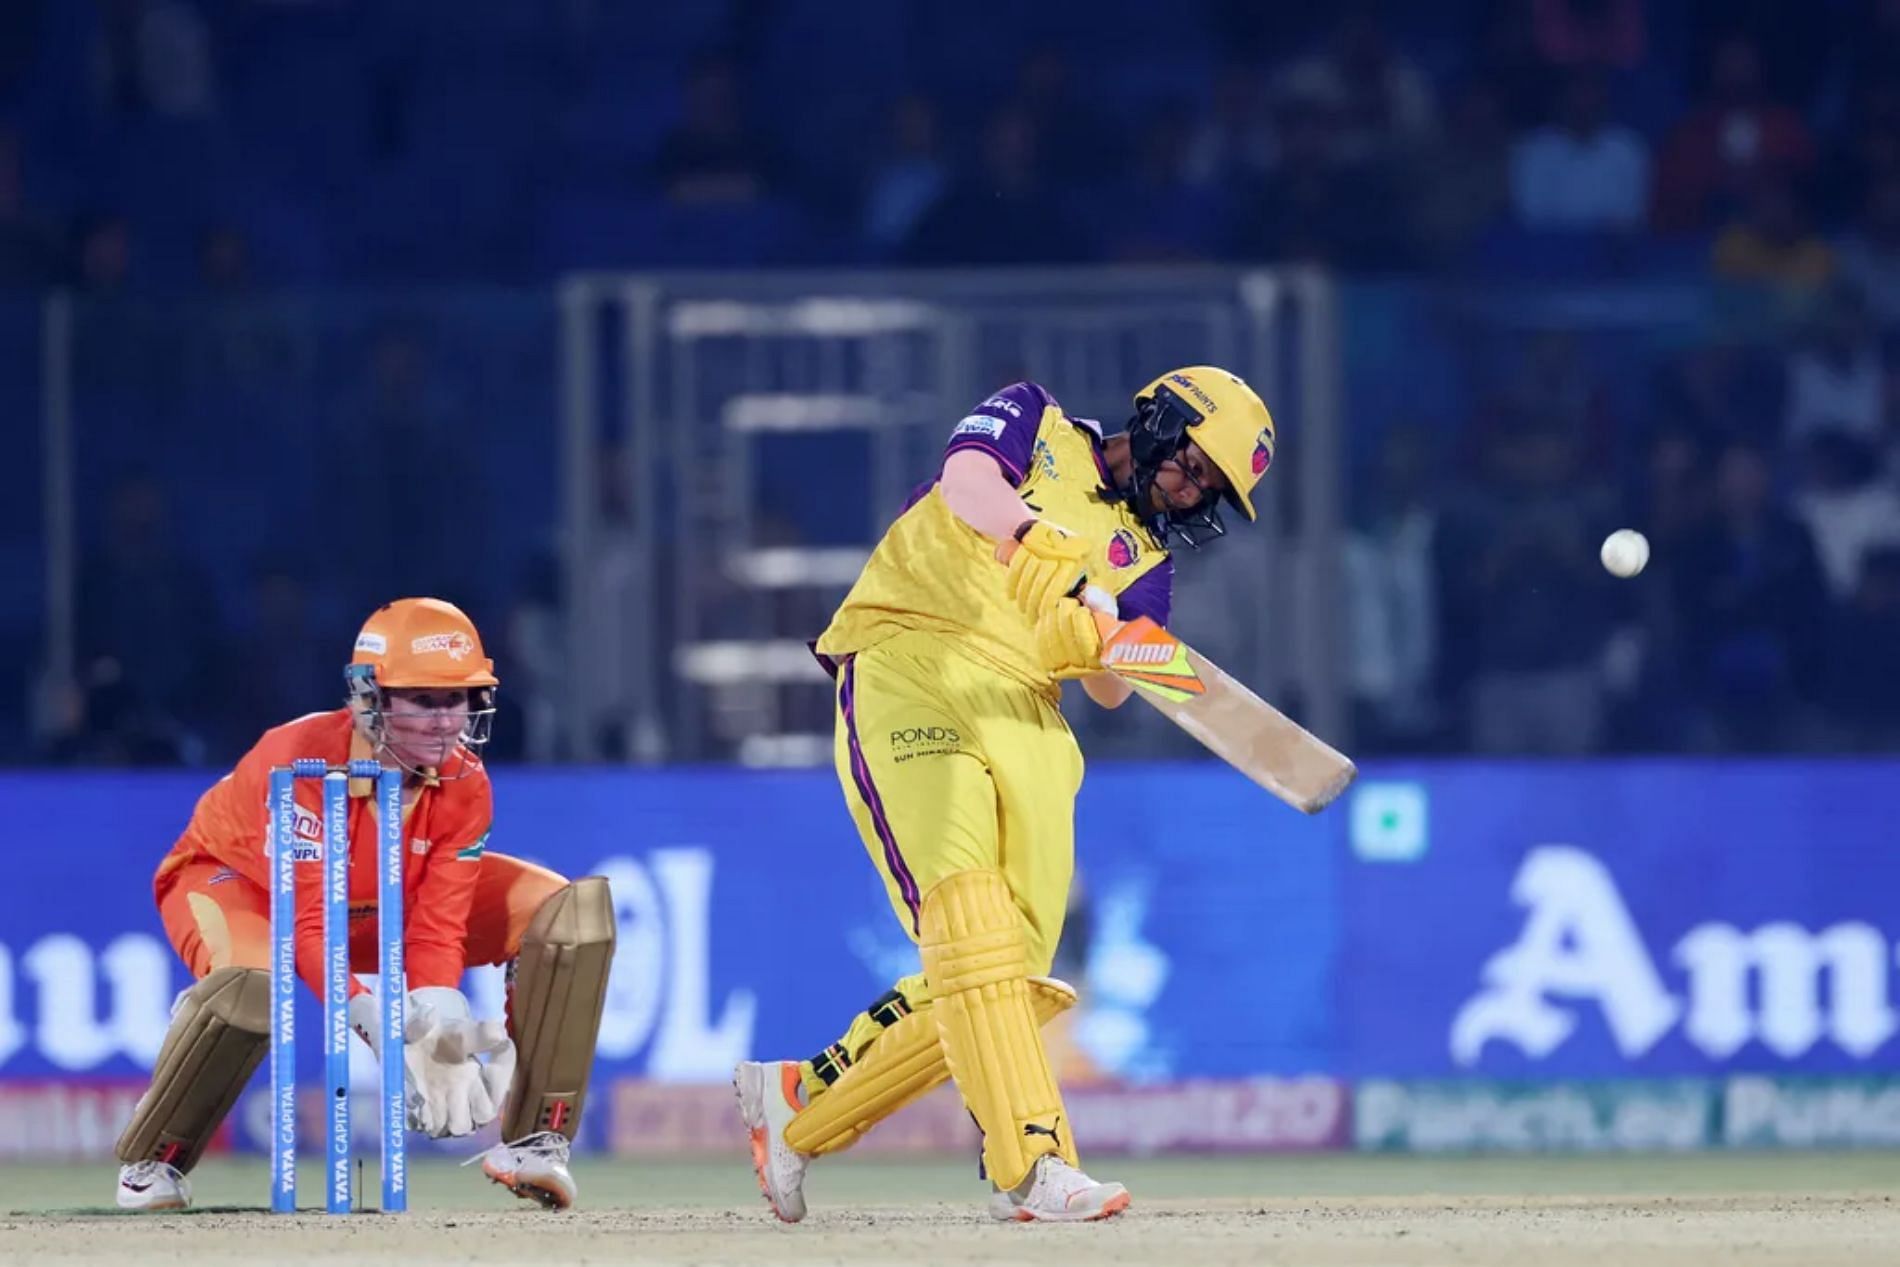 Deepti Sharma waged a lone battle for the Warriorz. (Pic: wplt20.com)